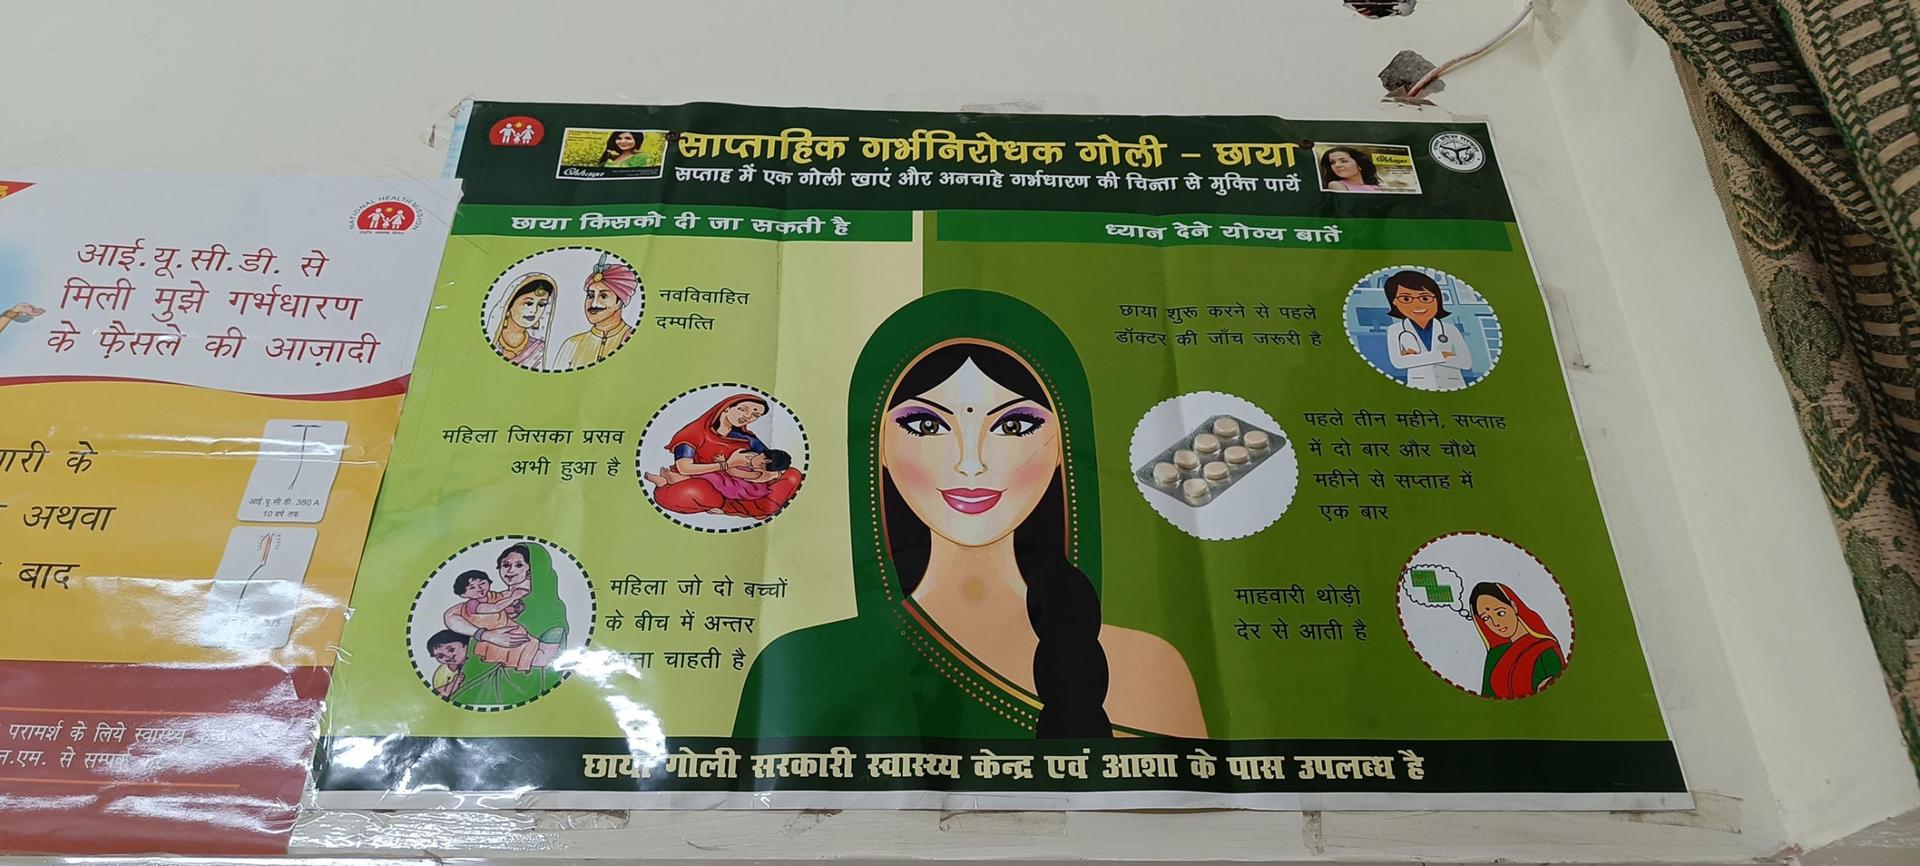 Family planning is encouraged throughout the halls of the district women's hospital in Meerut, Uttar Pradesh, India's most populous state.